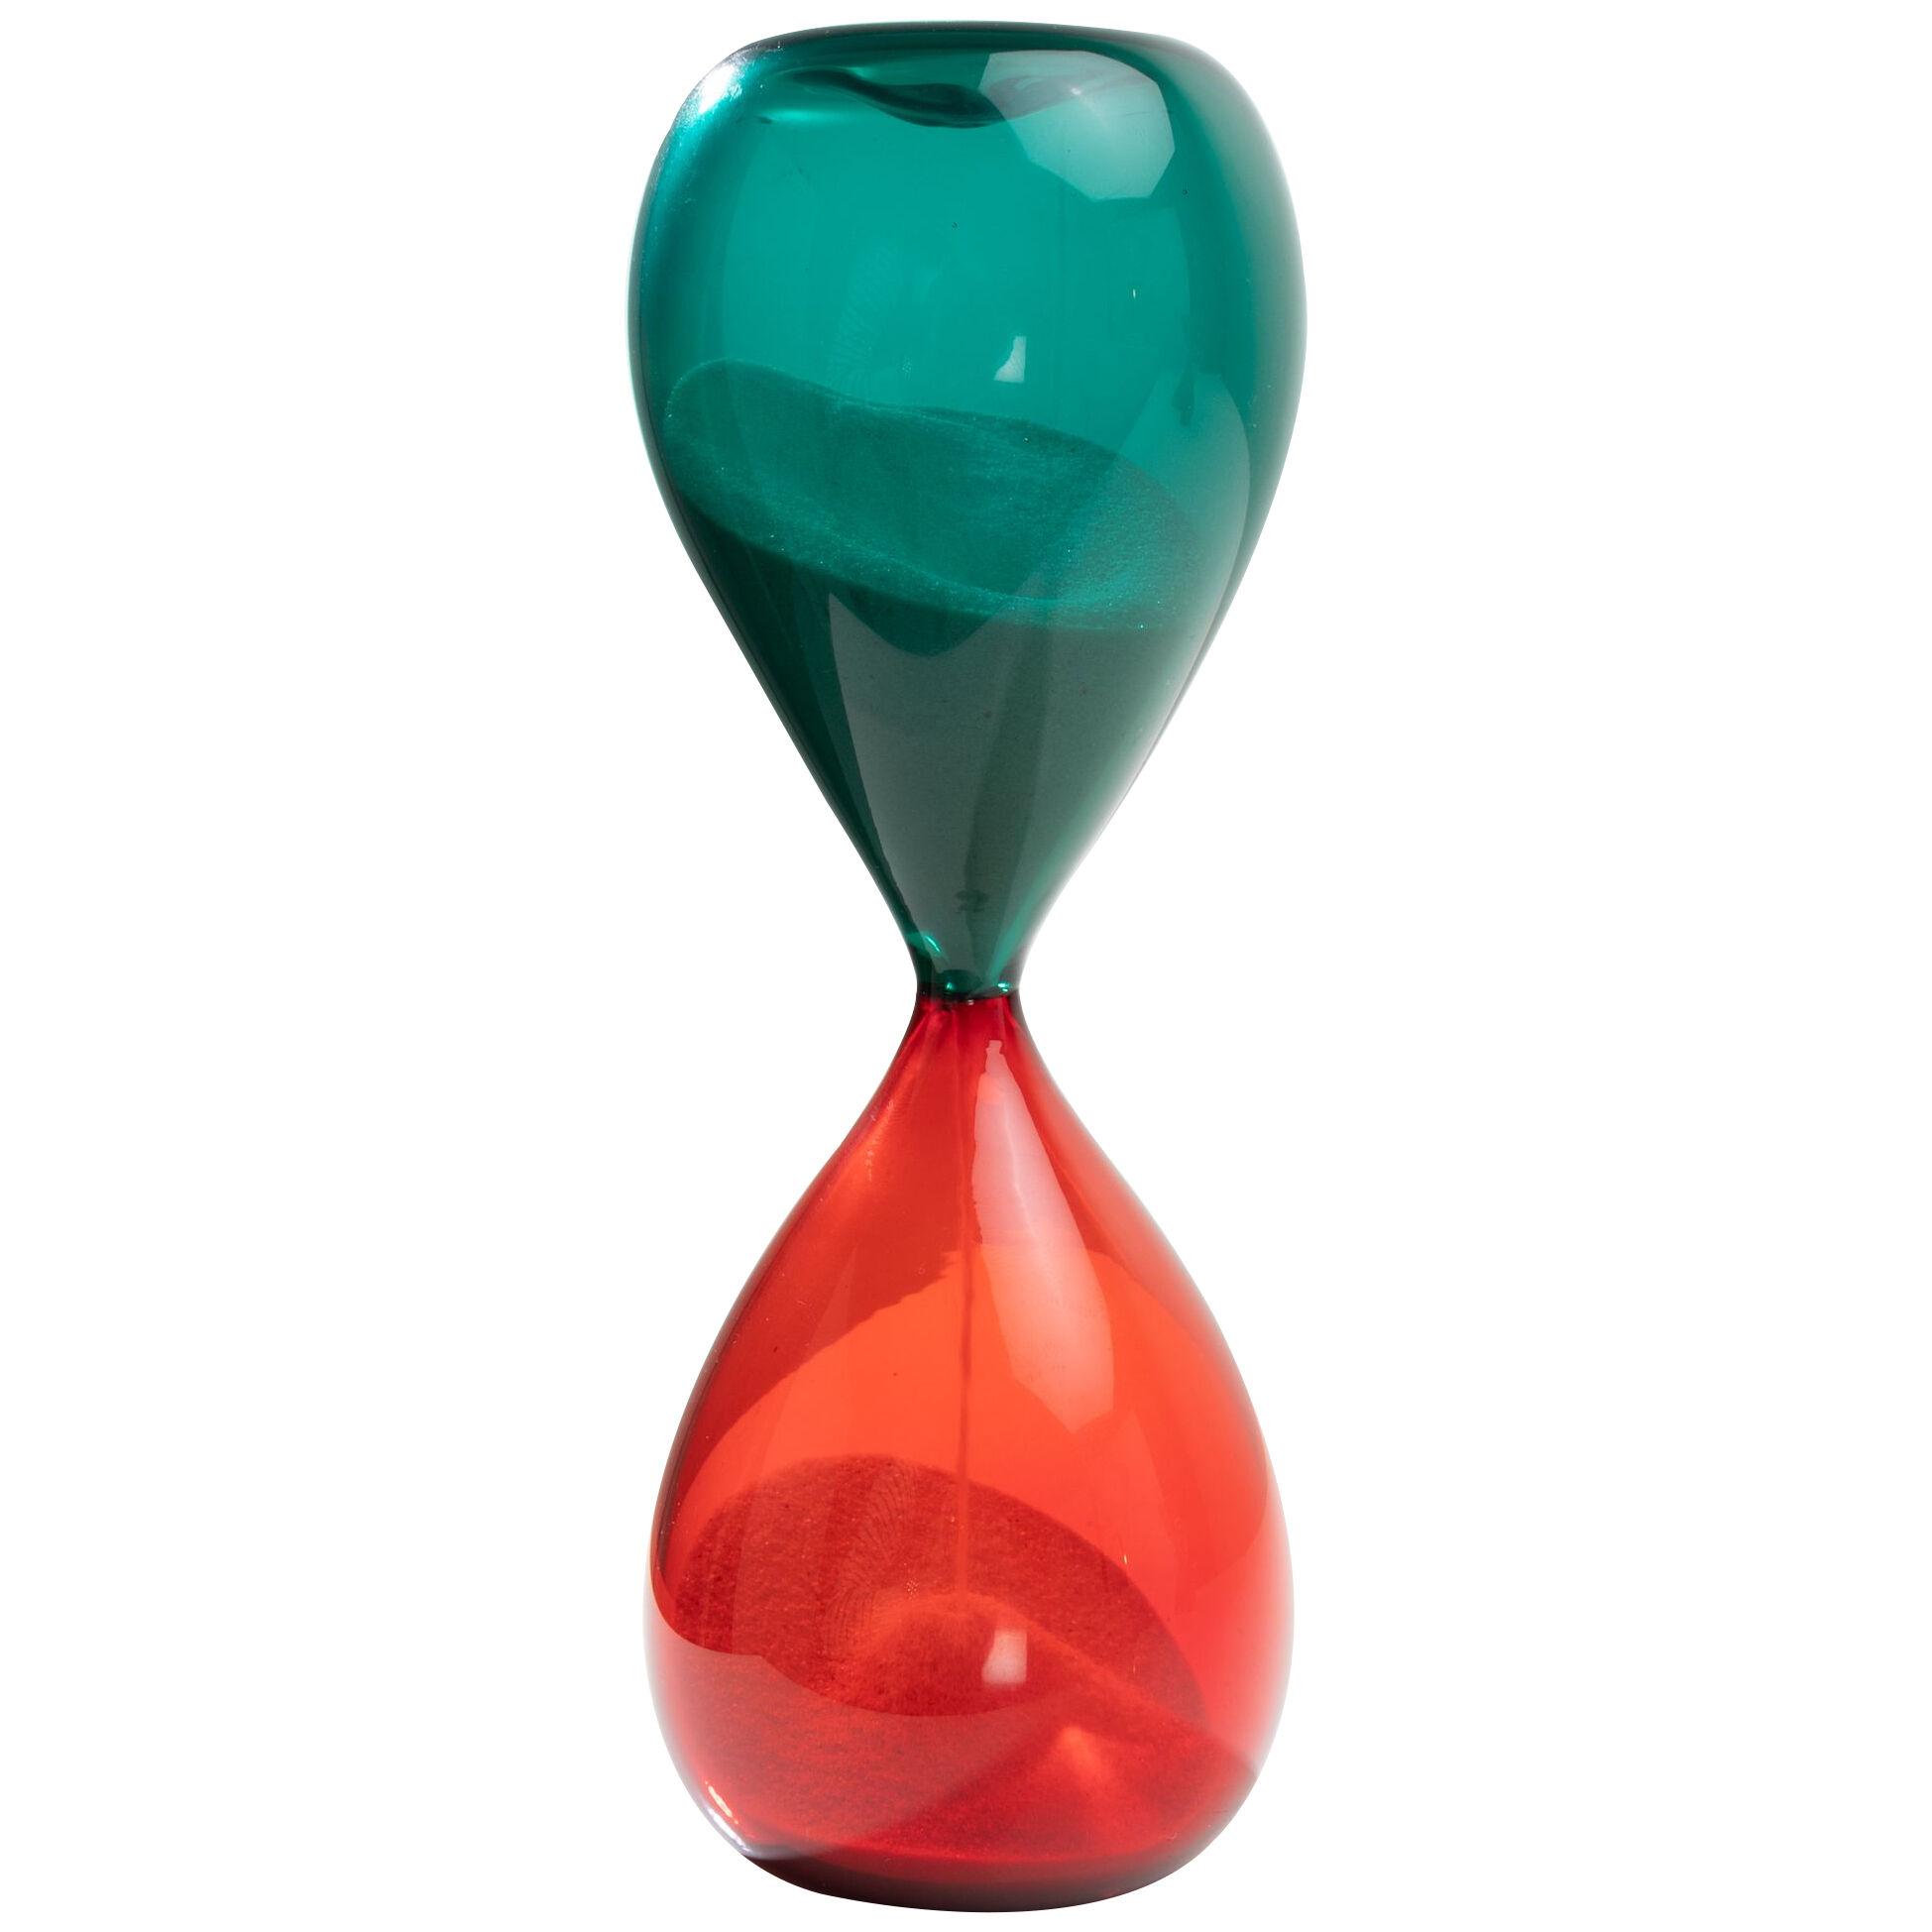 Blown glass hourglass (from the clessidra series) by Paolo Venini 